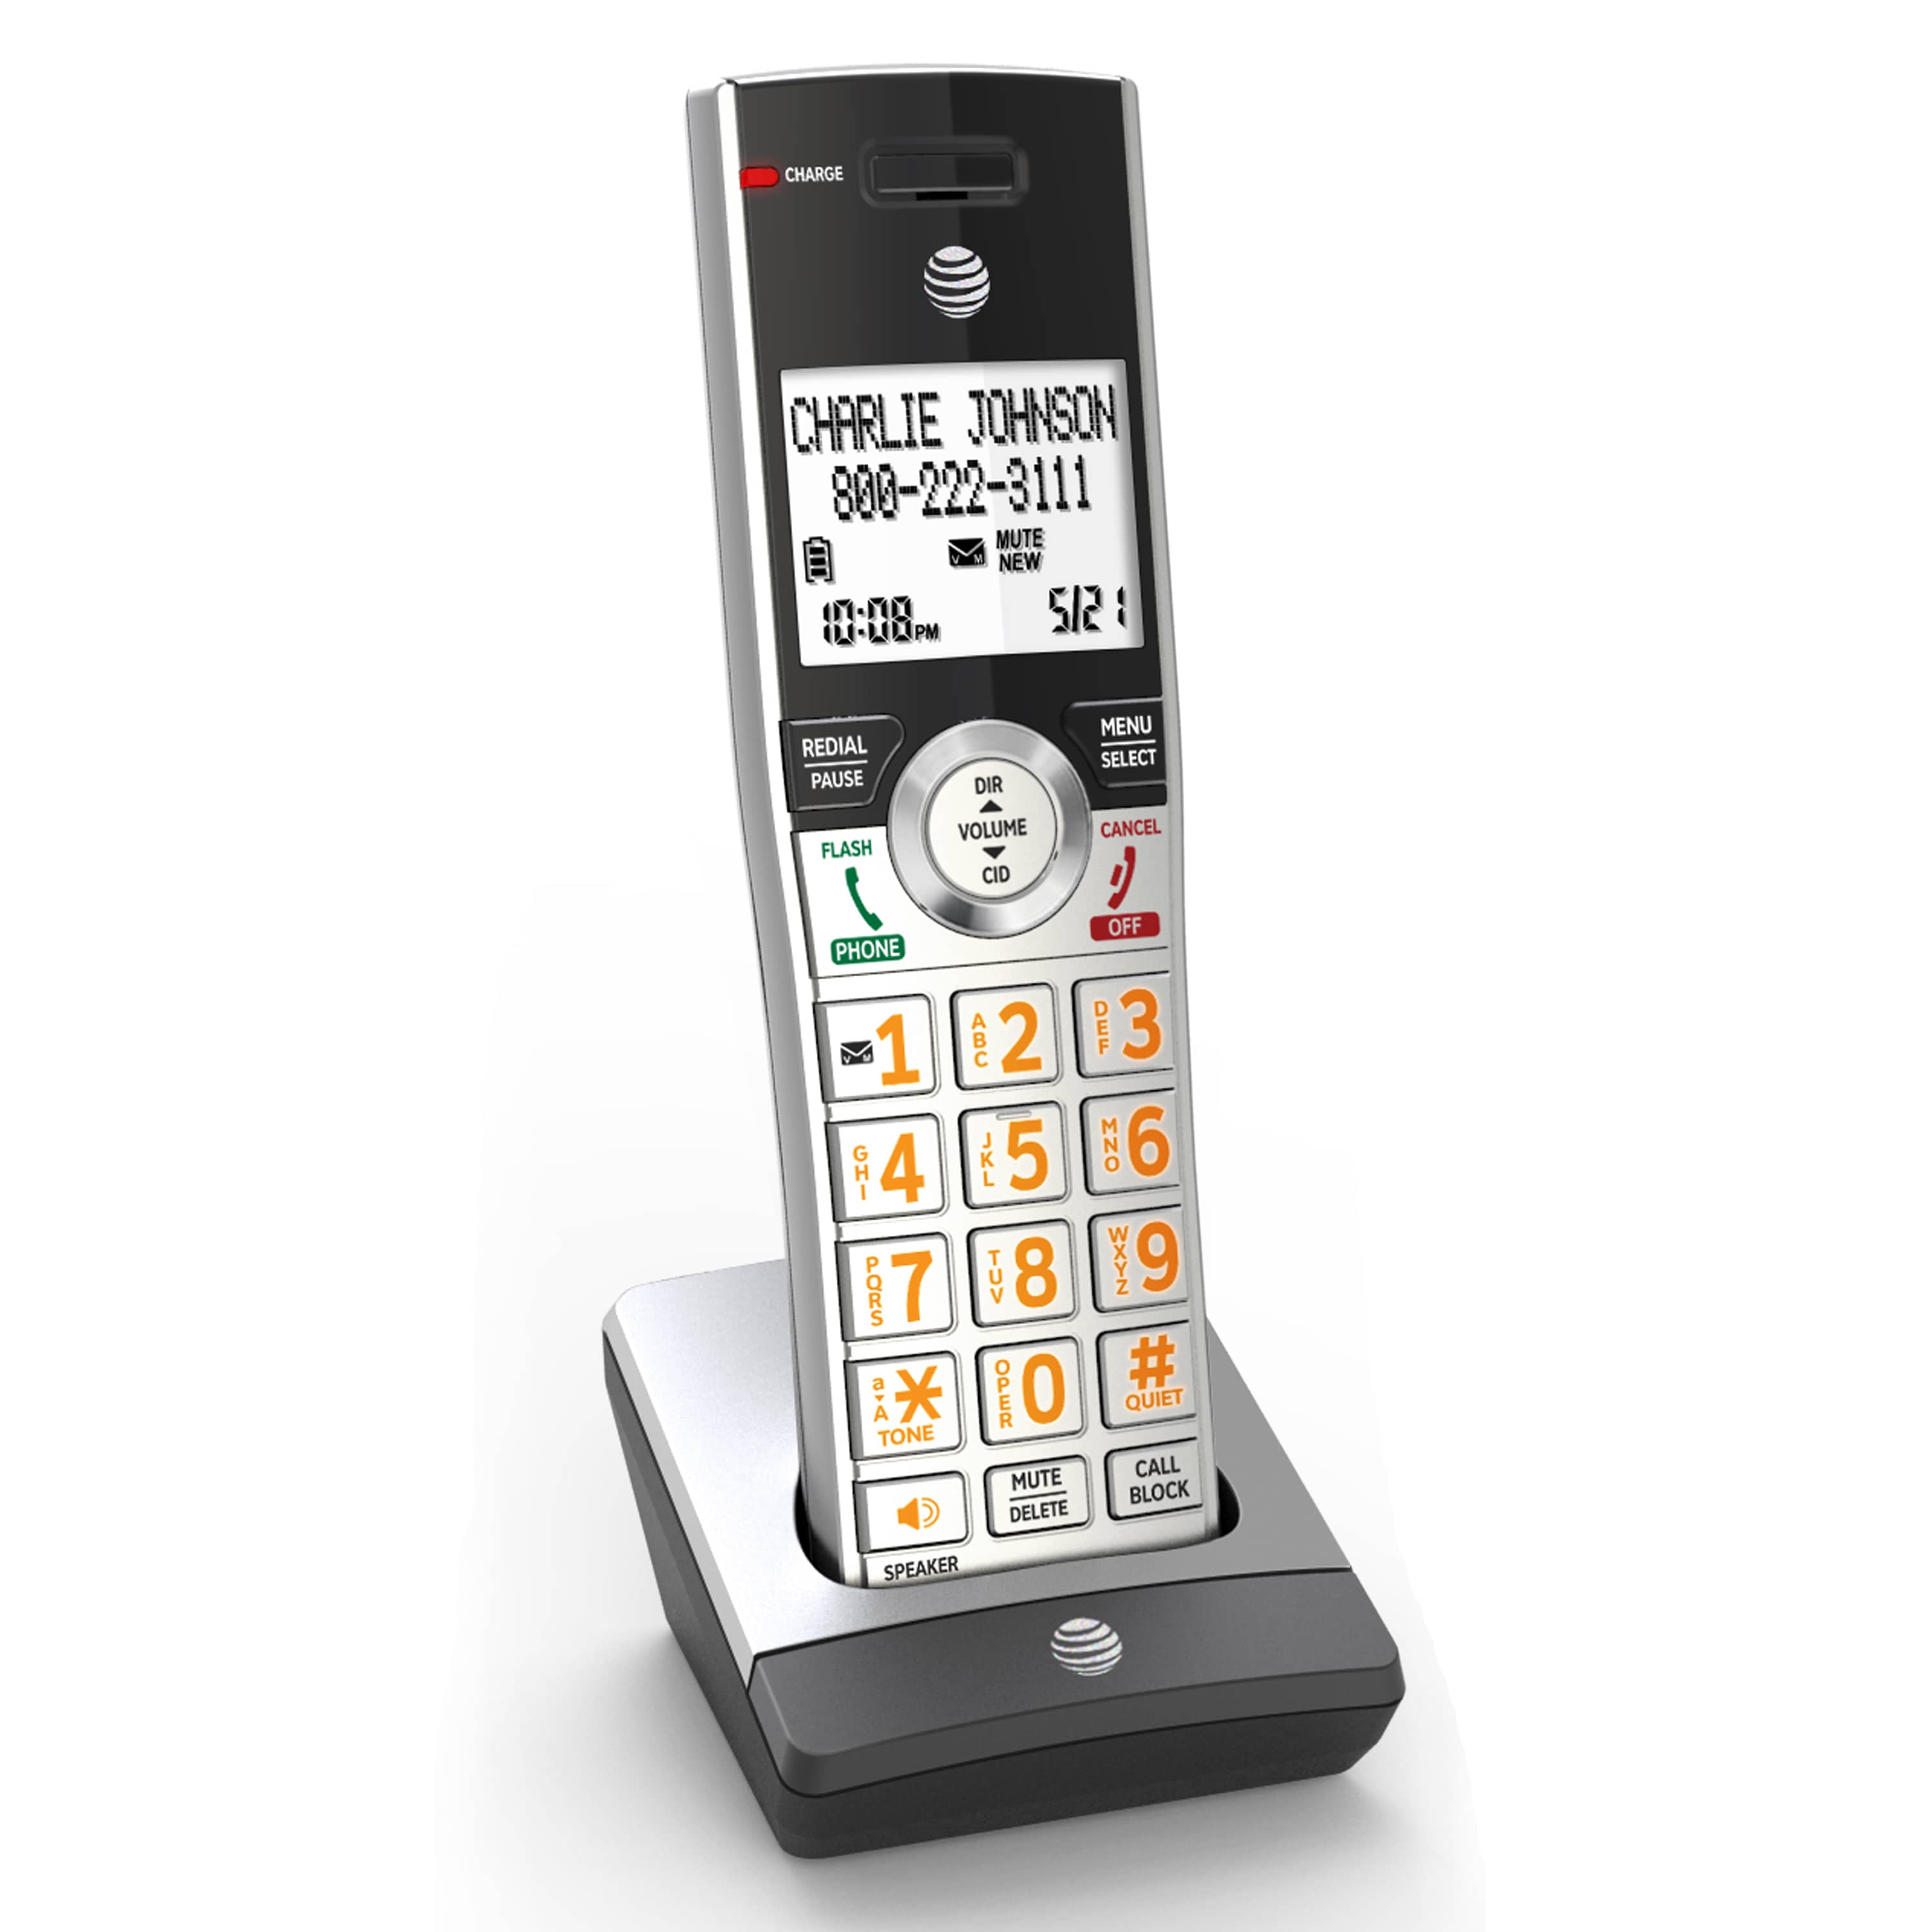 6 handset phone system with smart call blocker - view 16